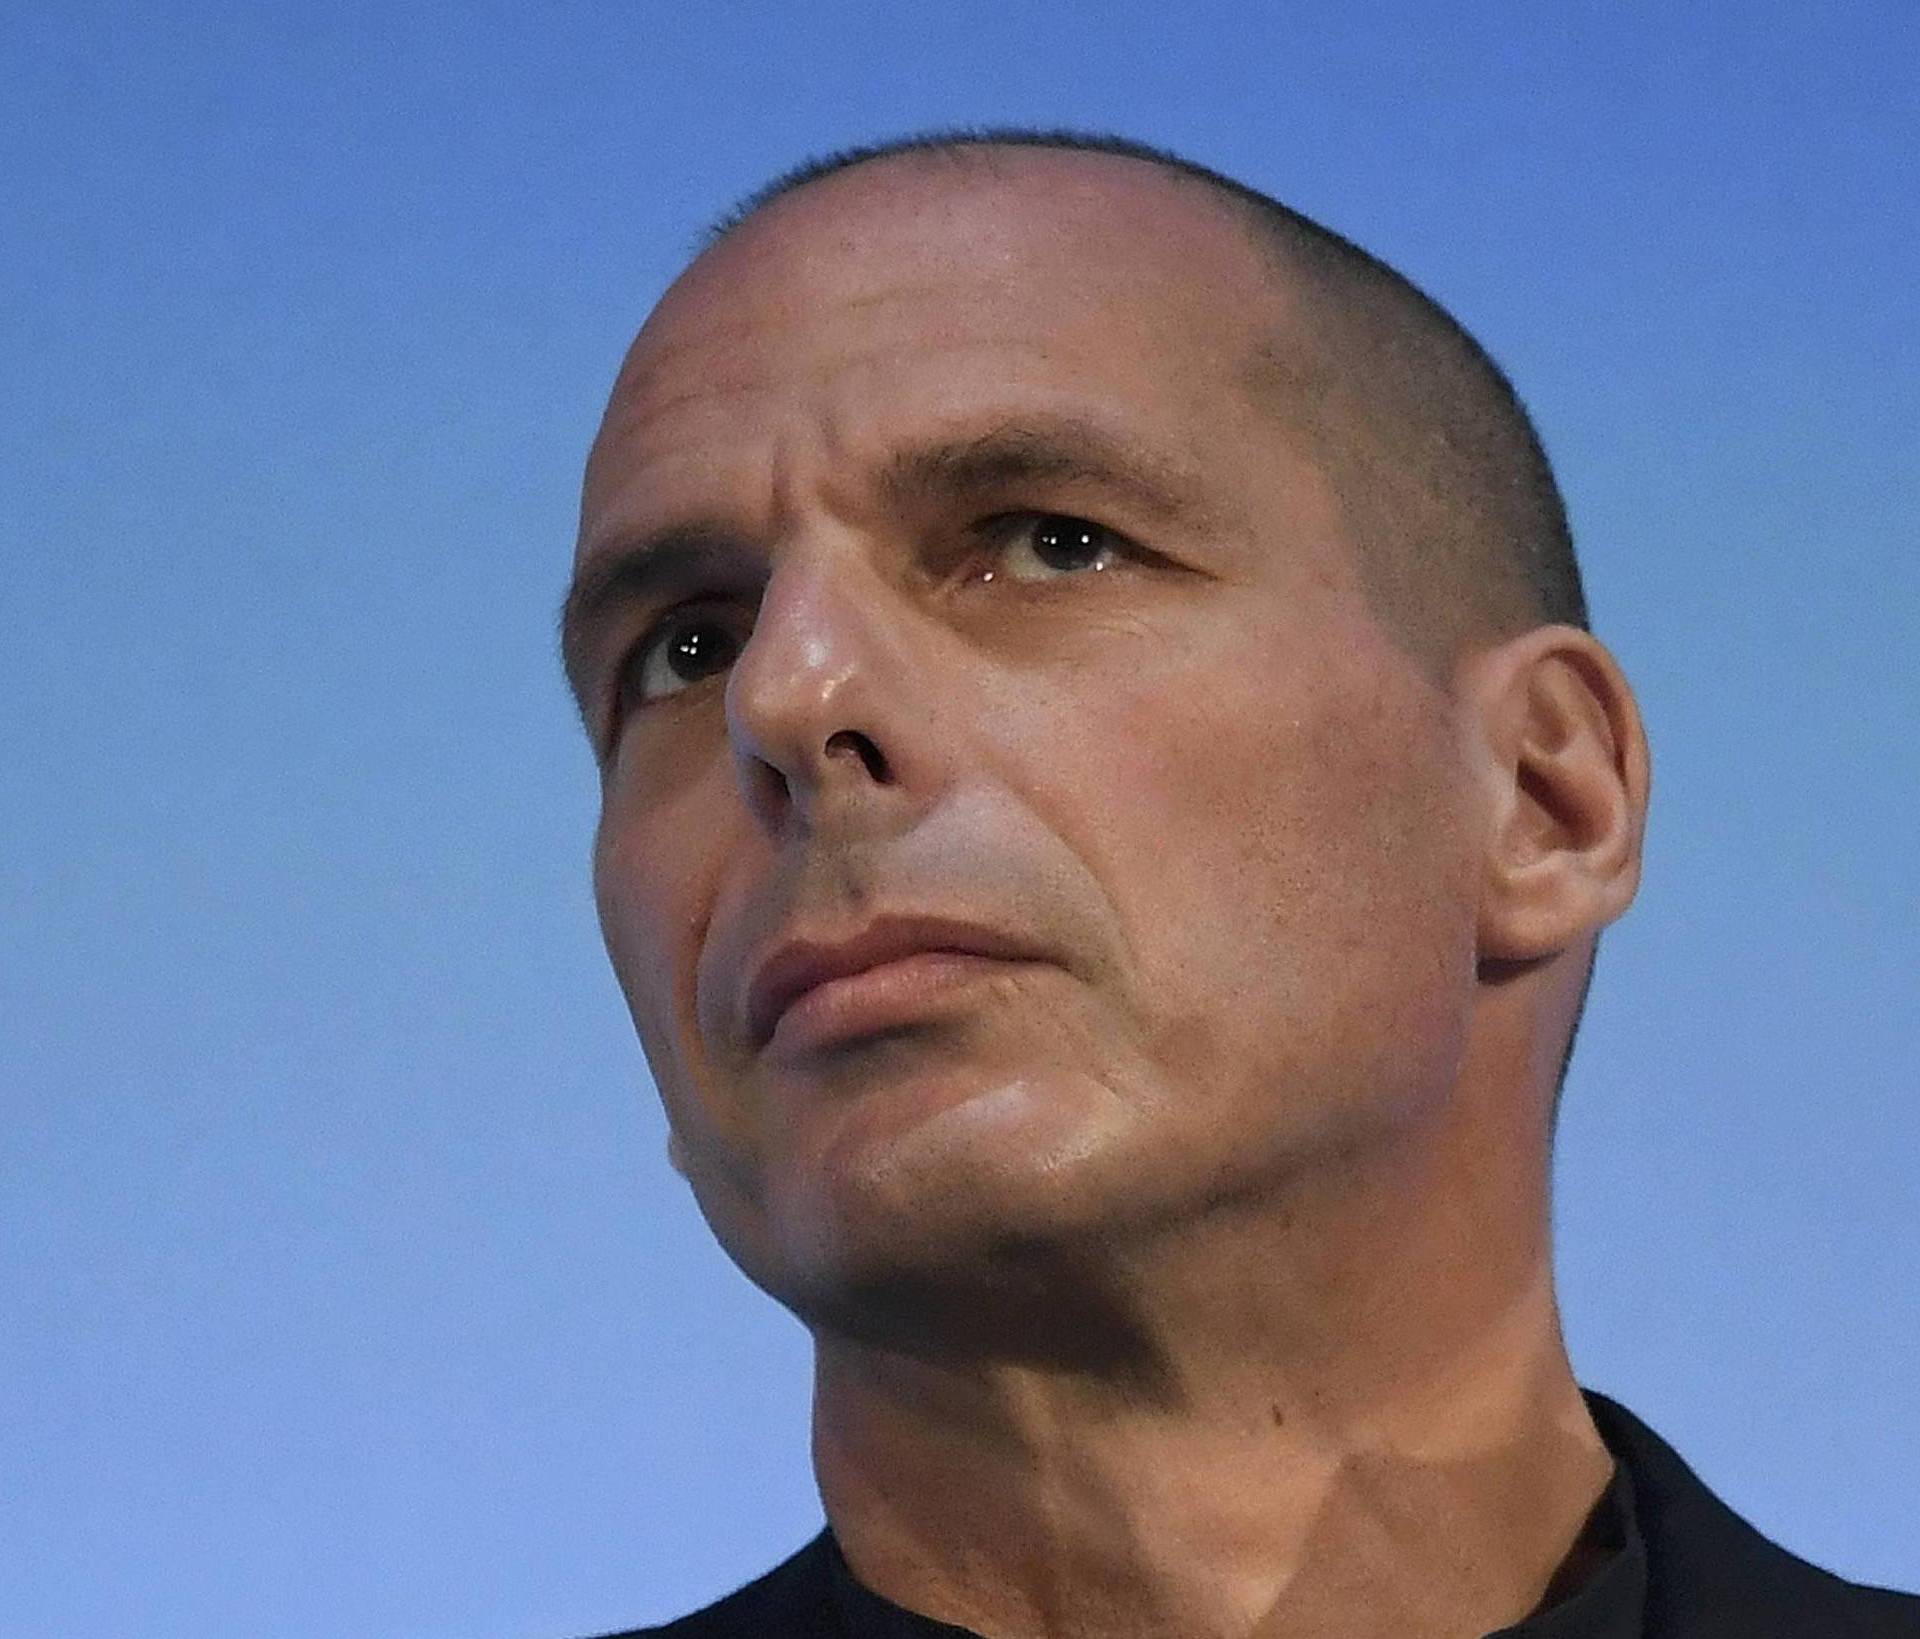 Former Greek Finance Minister Yanis Varoufakis answers questions during a panel debate at the Institute of Directors convention in London